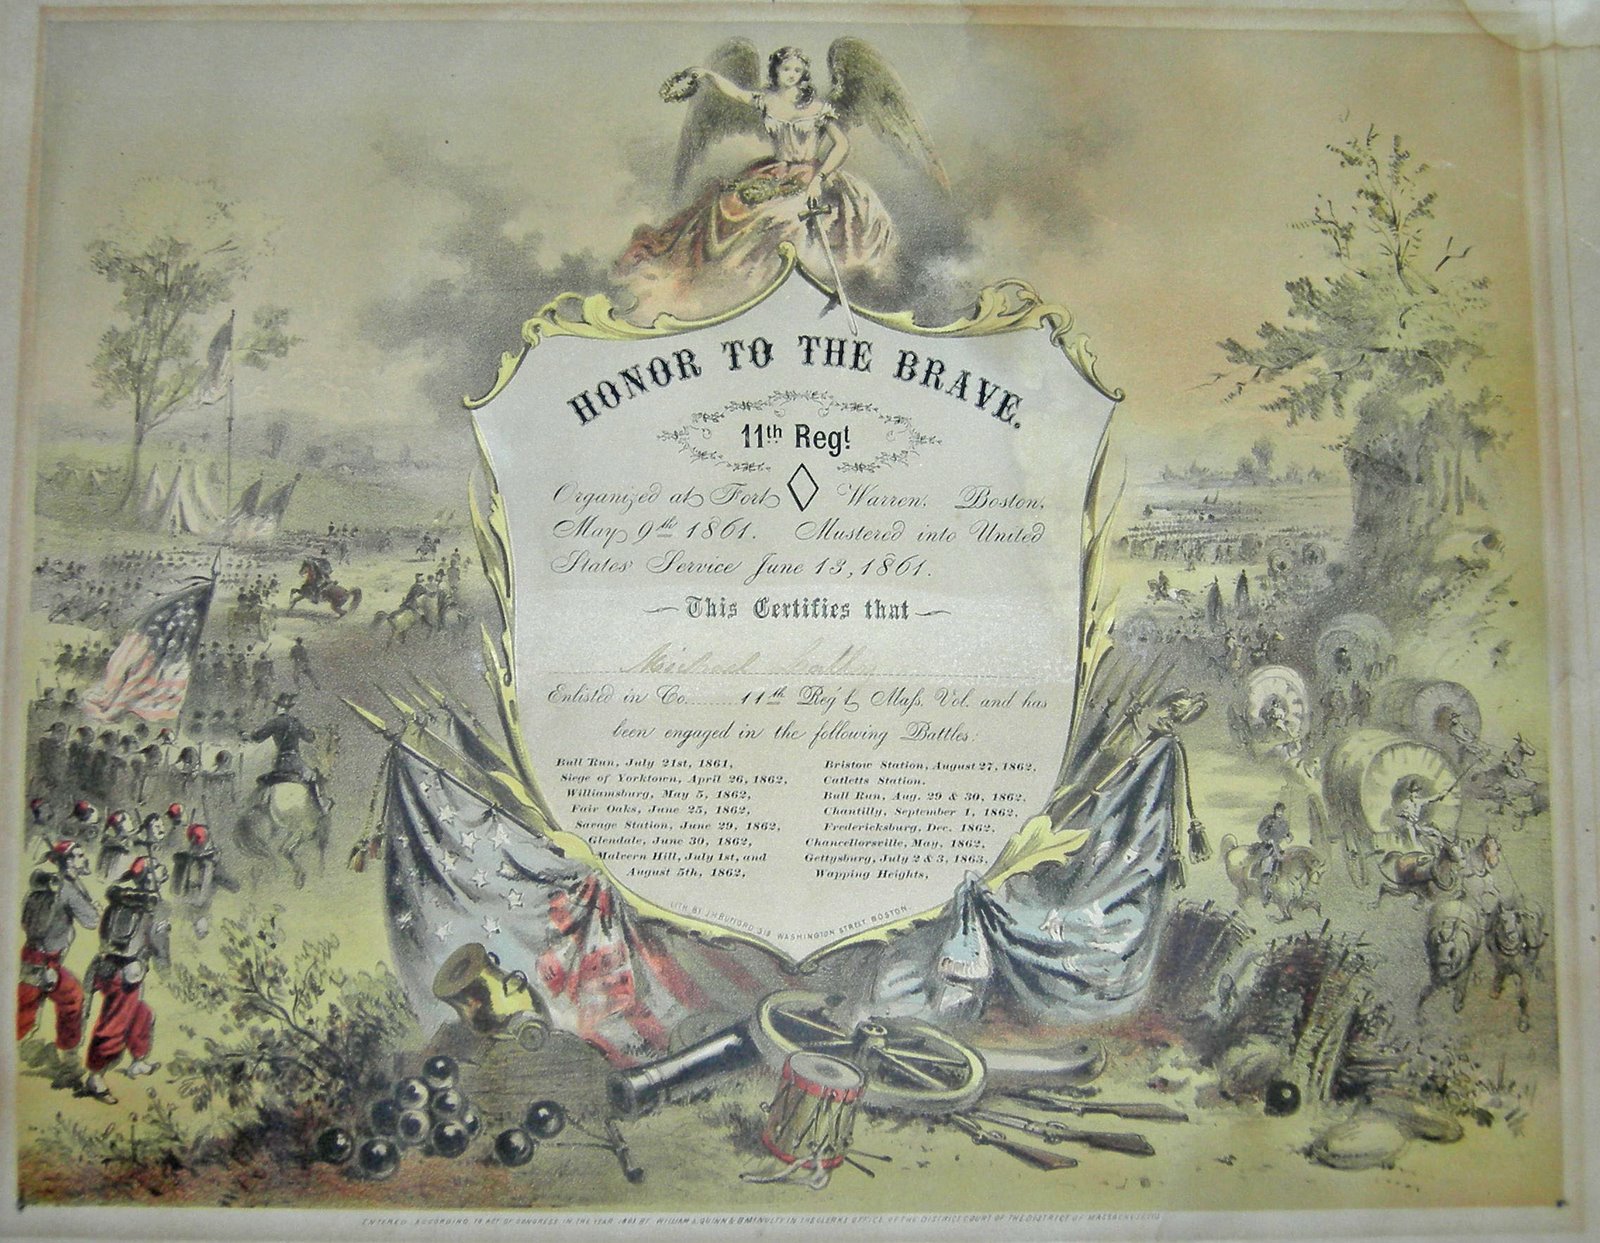 Color certificate that recognizes Michael Lally for his engagement in American Civil War battles from 1861-1863